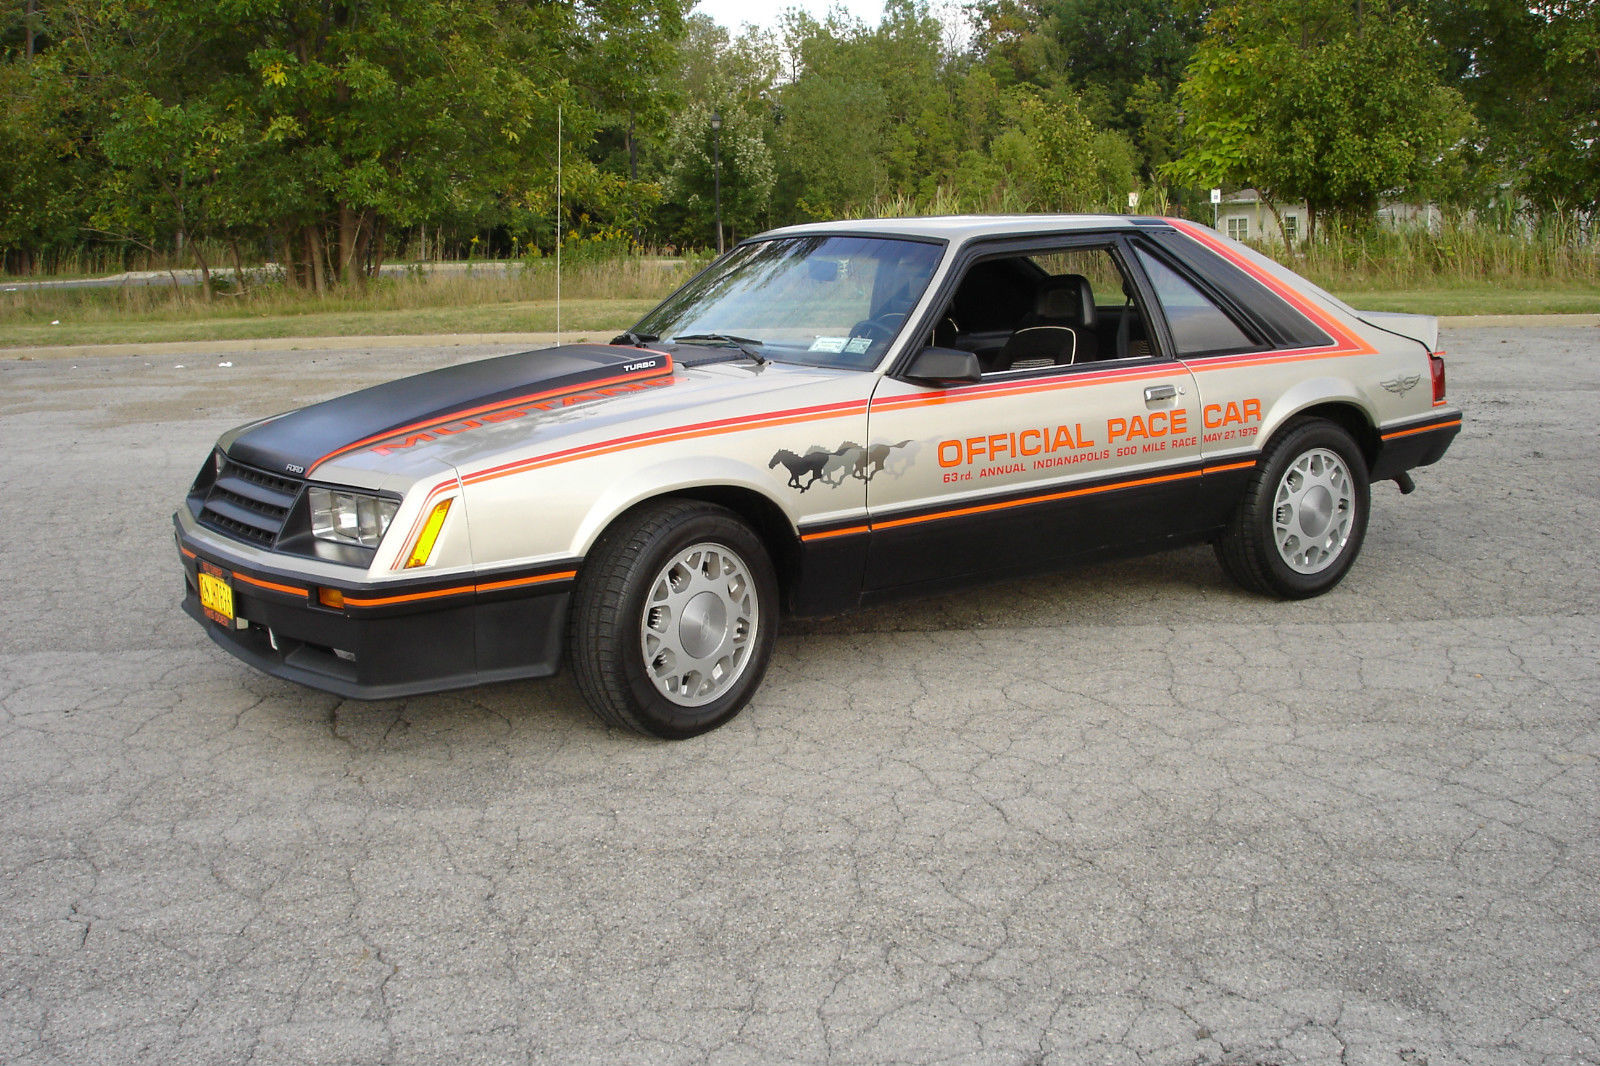 1979 Ford Mustang Turbo Engine 2.3 Modify